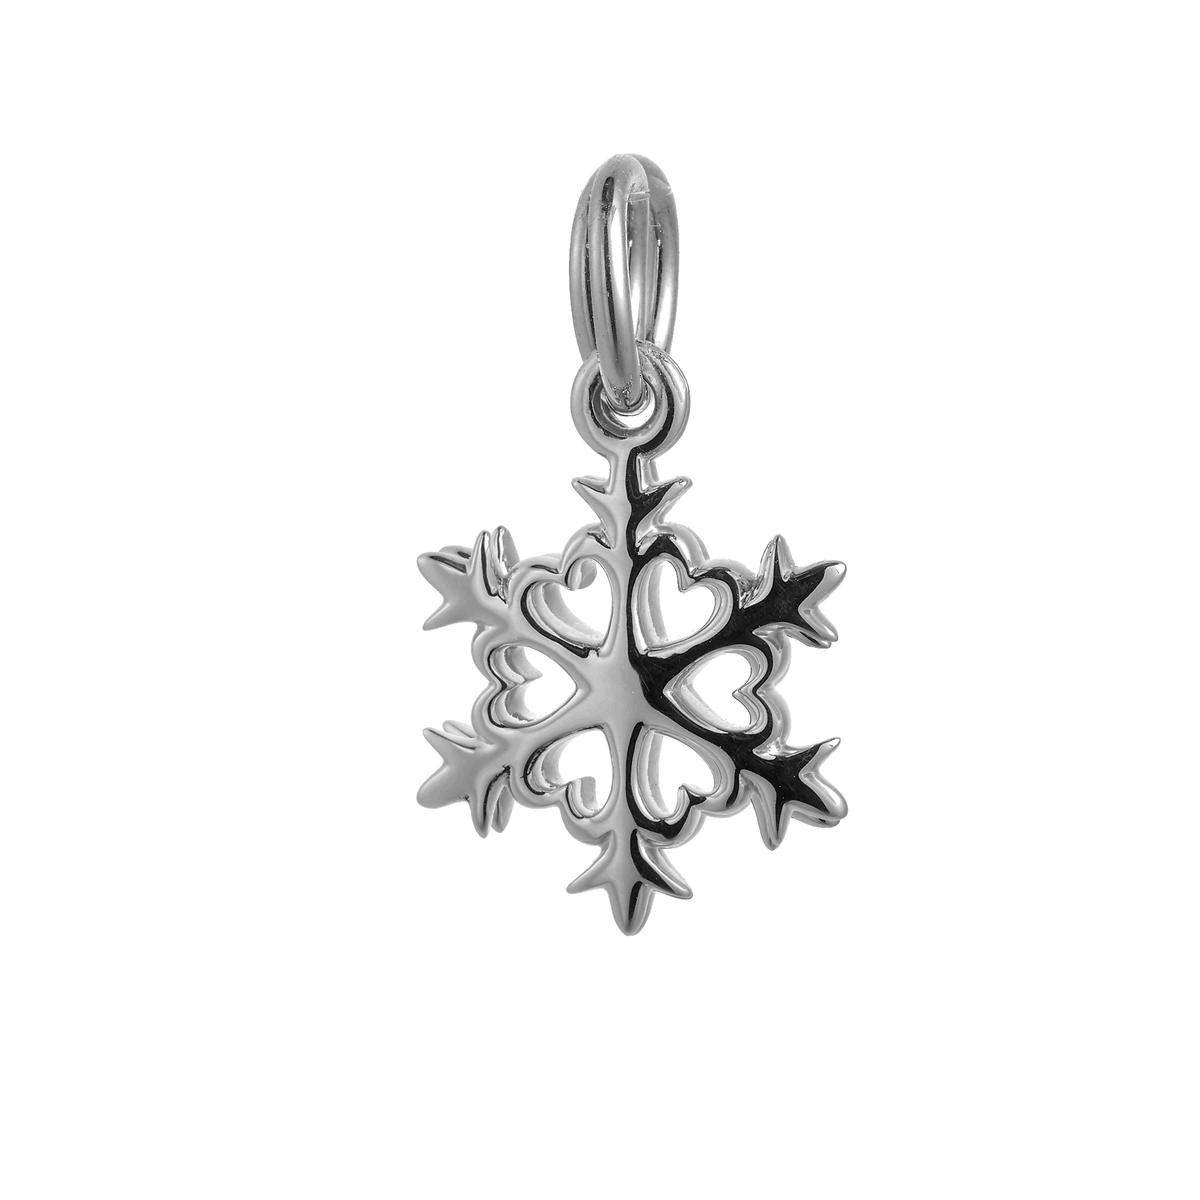 silver snowflake charm with hearts inside for bracelet or necklace